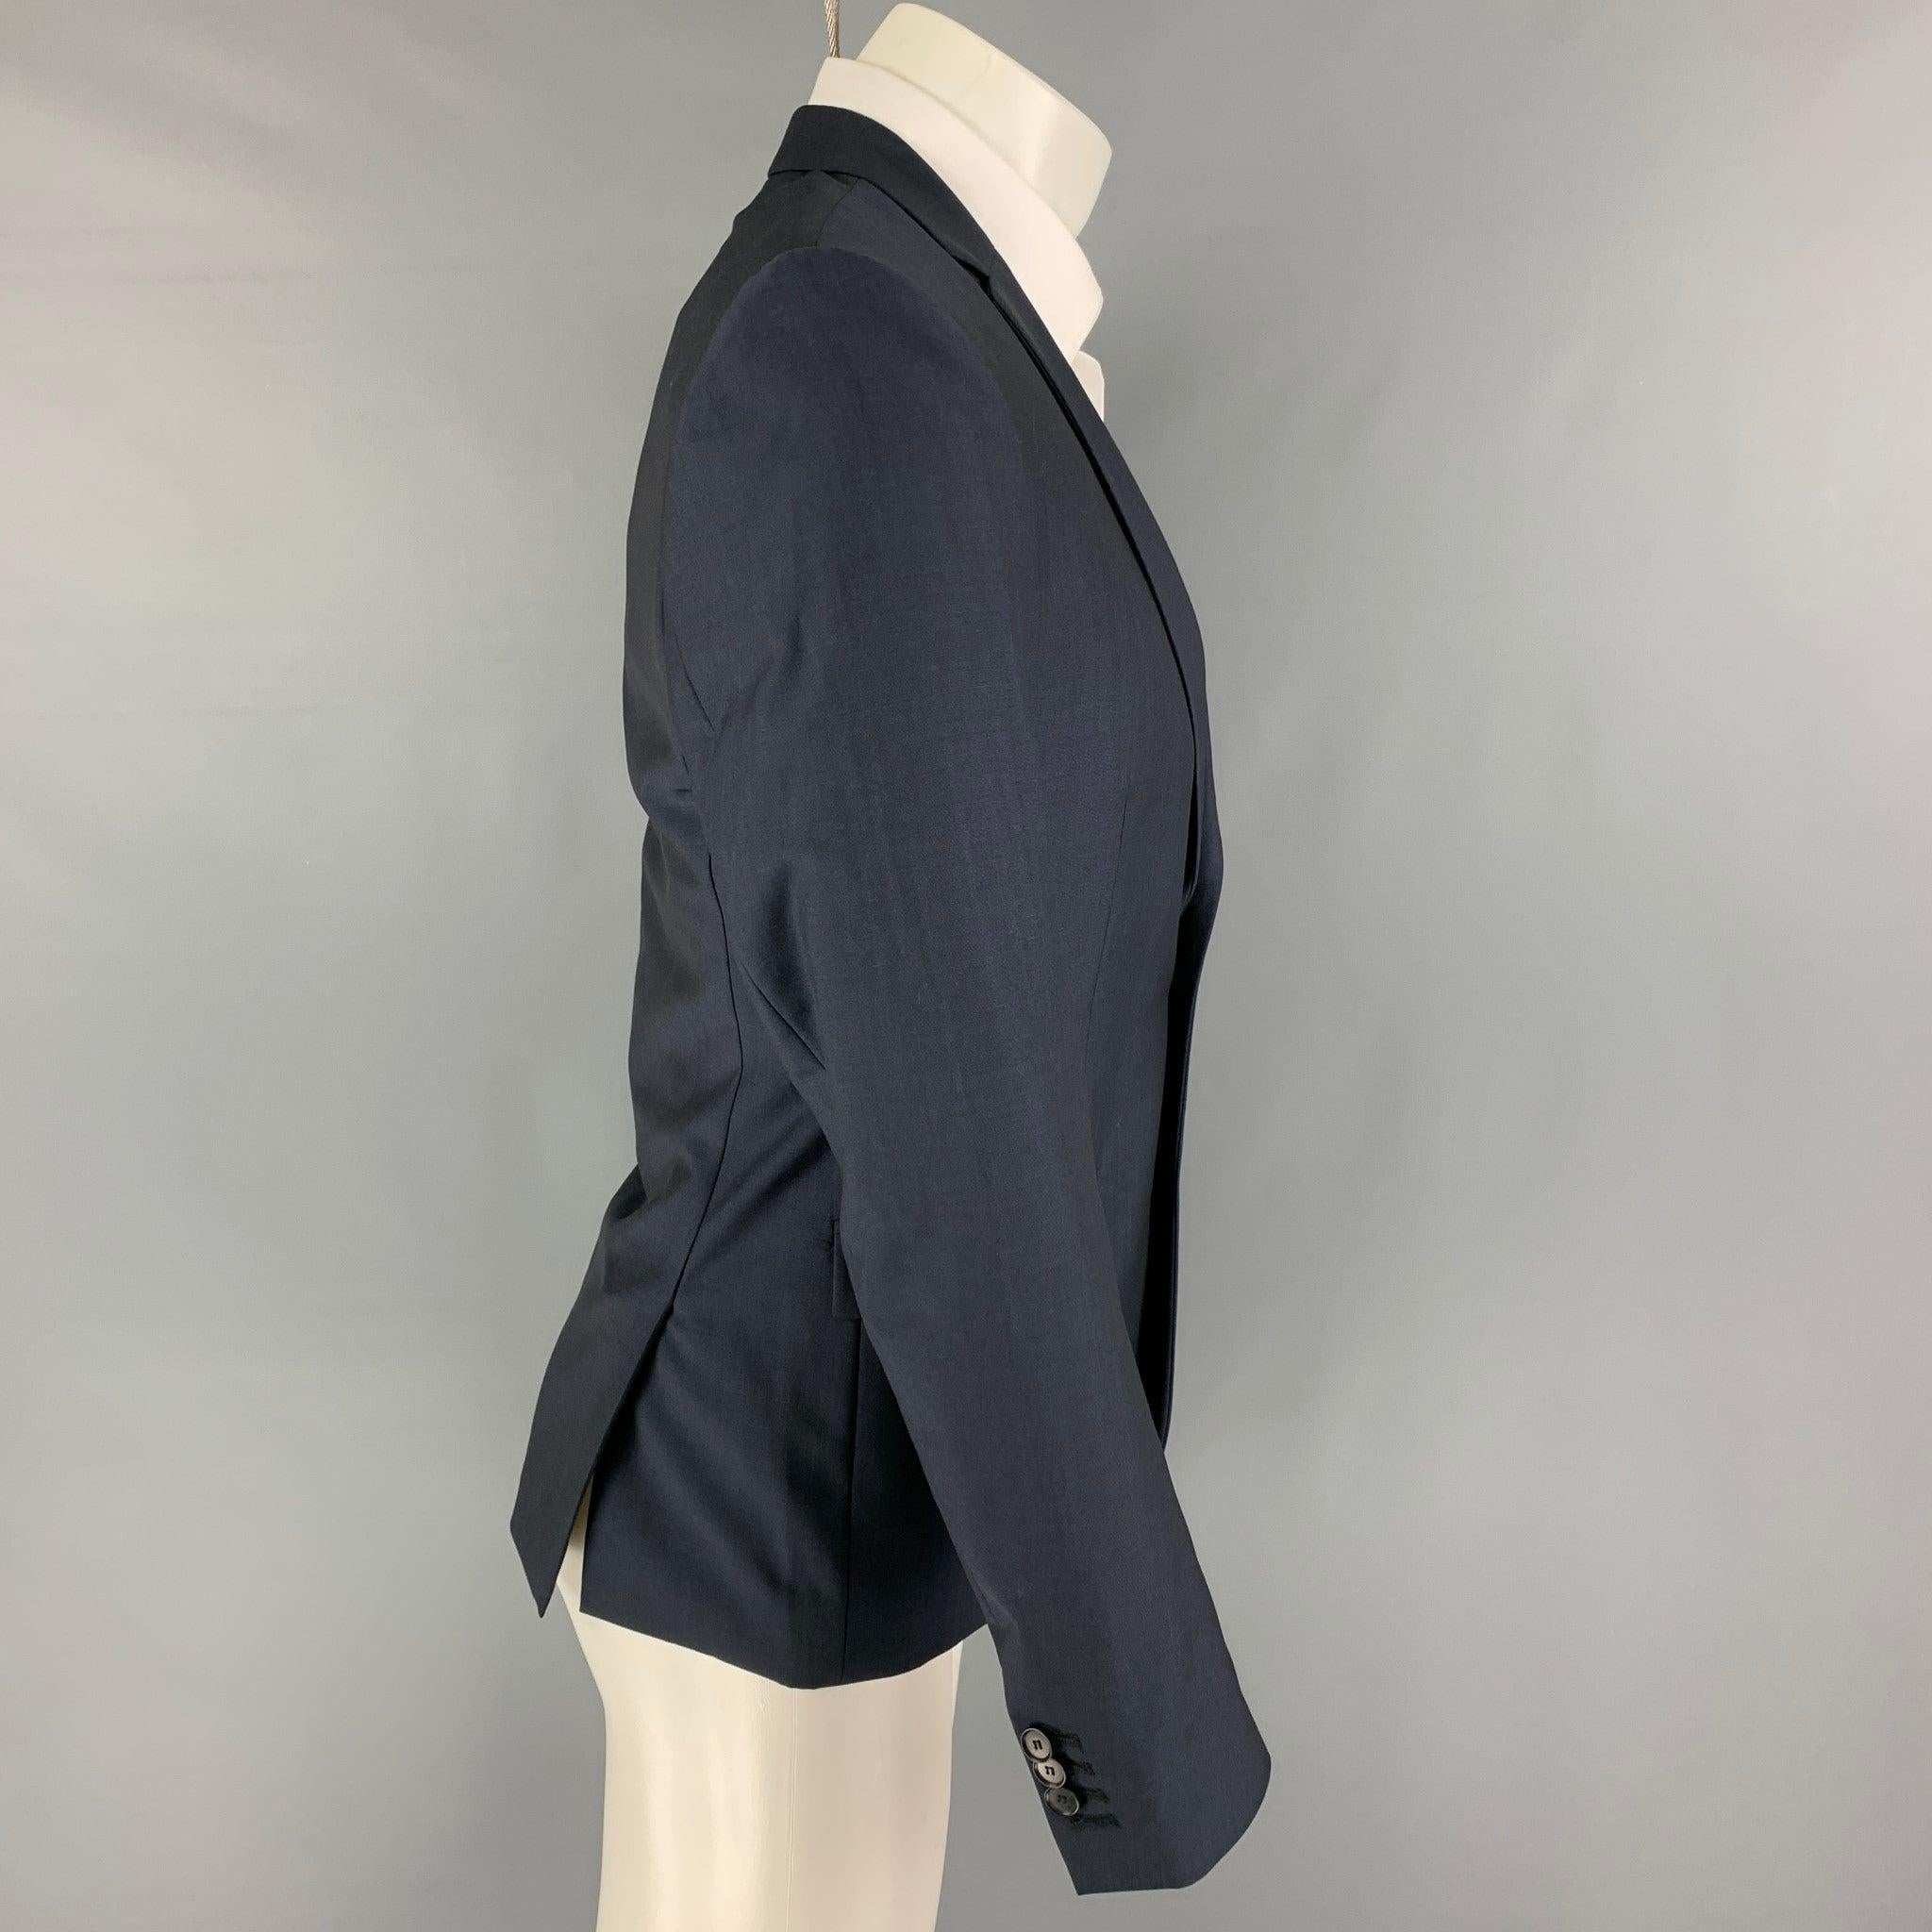 THE KOOPLES sport coat comes in a navy wool / mohair with a full liner featuring a notch lapel, flap pockets, double back vent, and a double button closure. New with tags. 

Marked:   46 

Measurements: 
 
Shoulder: 17.5 inches Chest: 38 inches